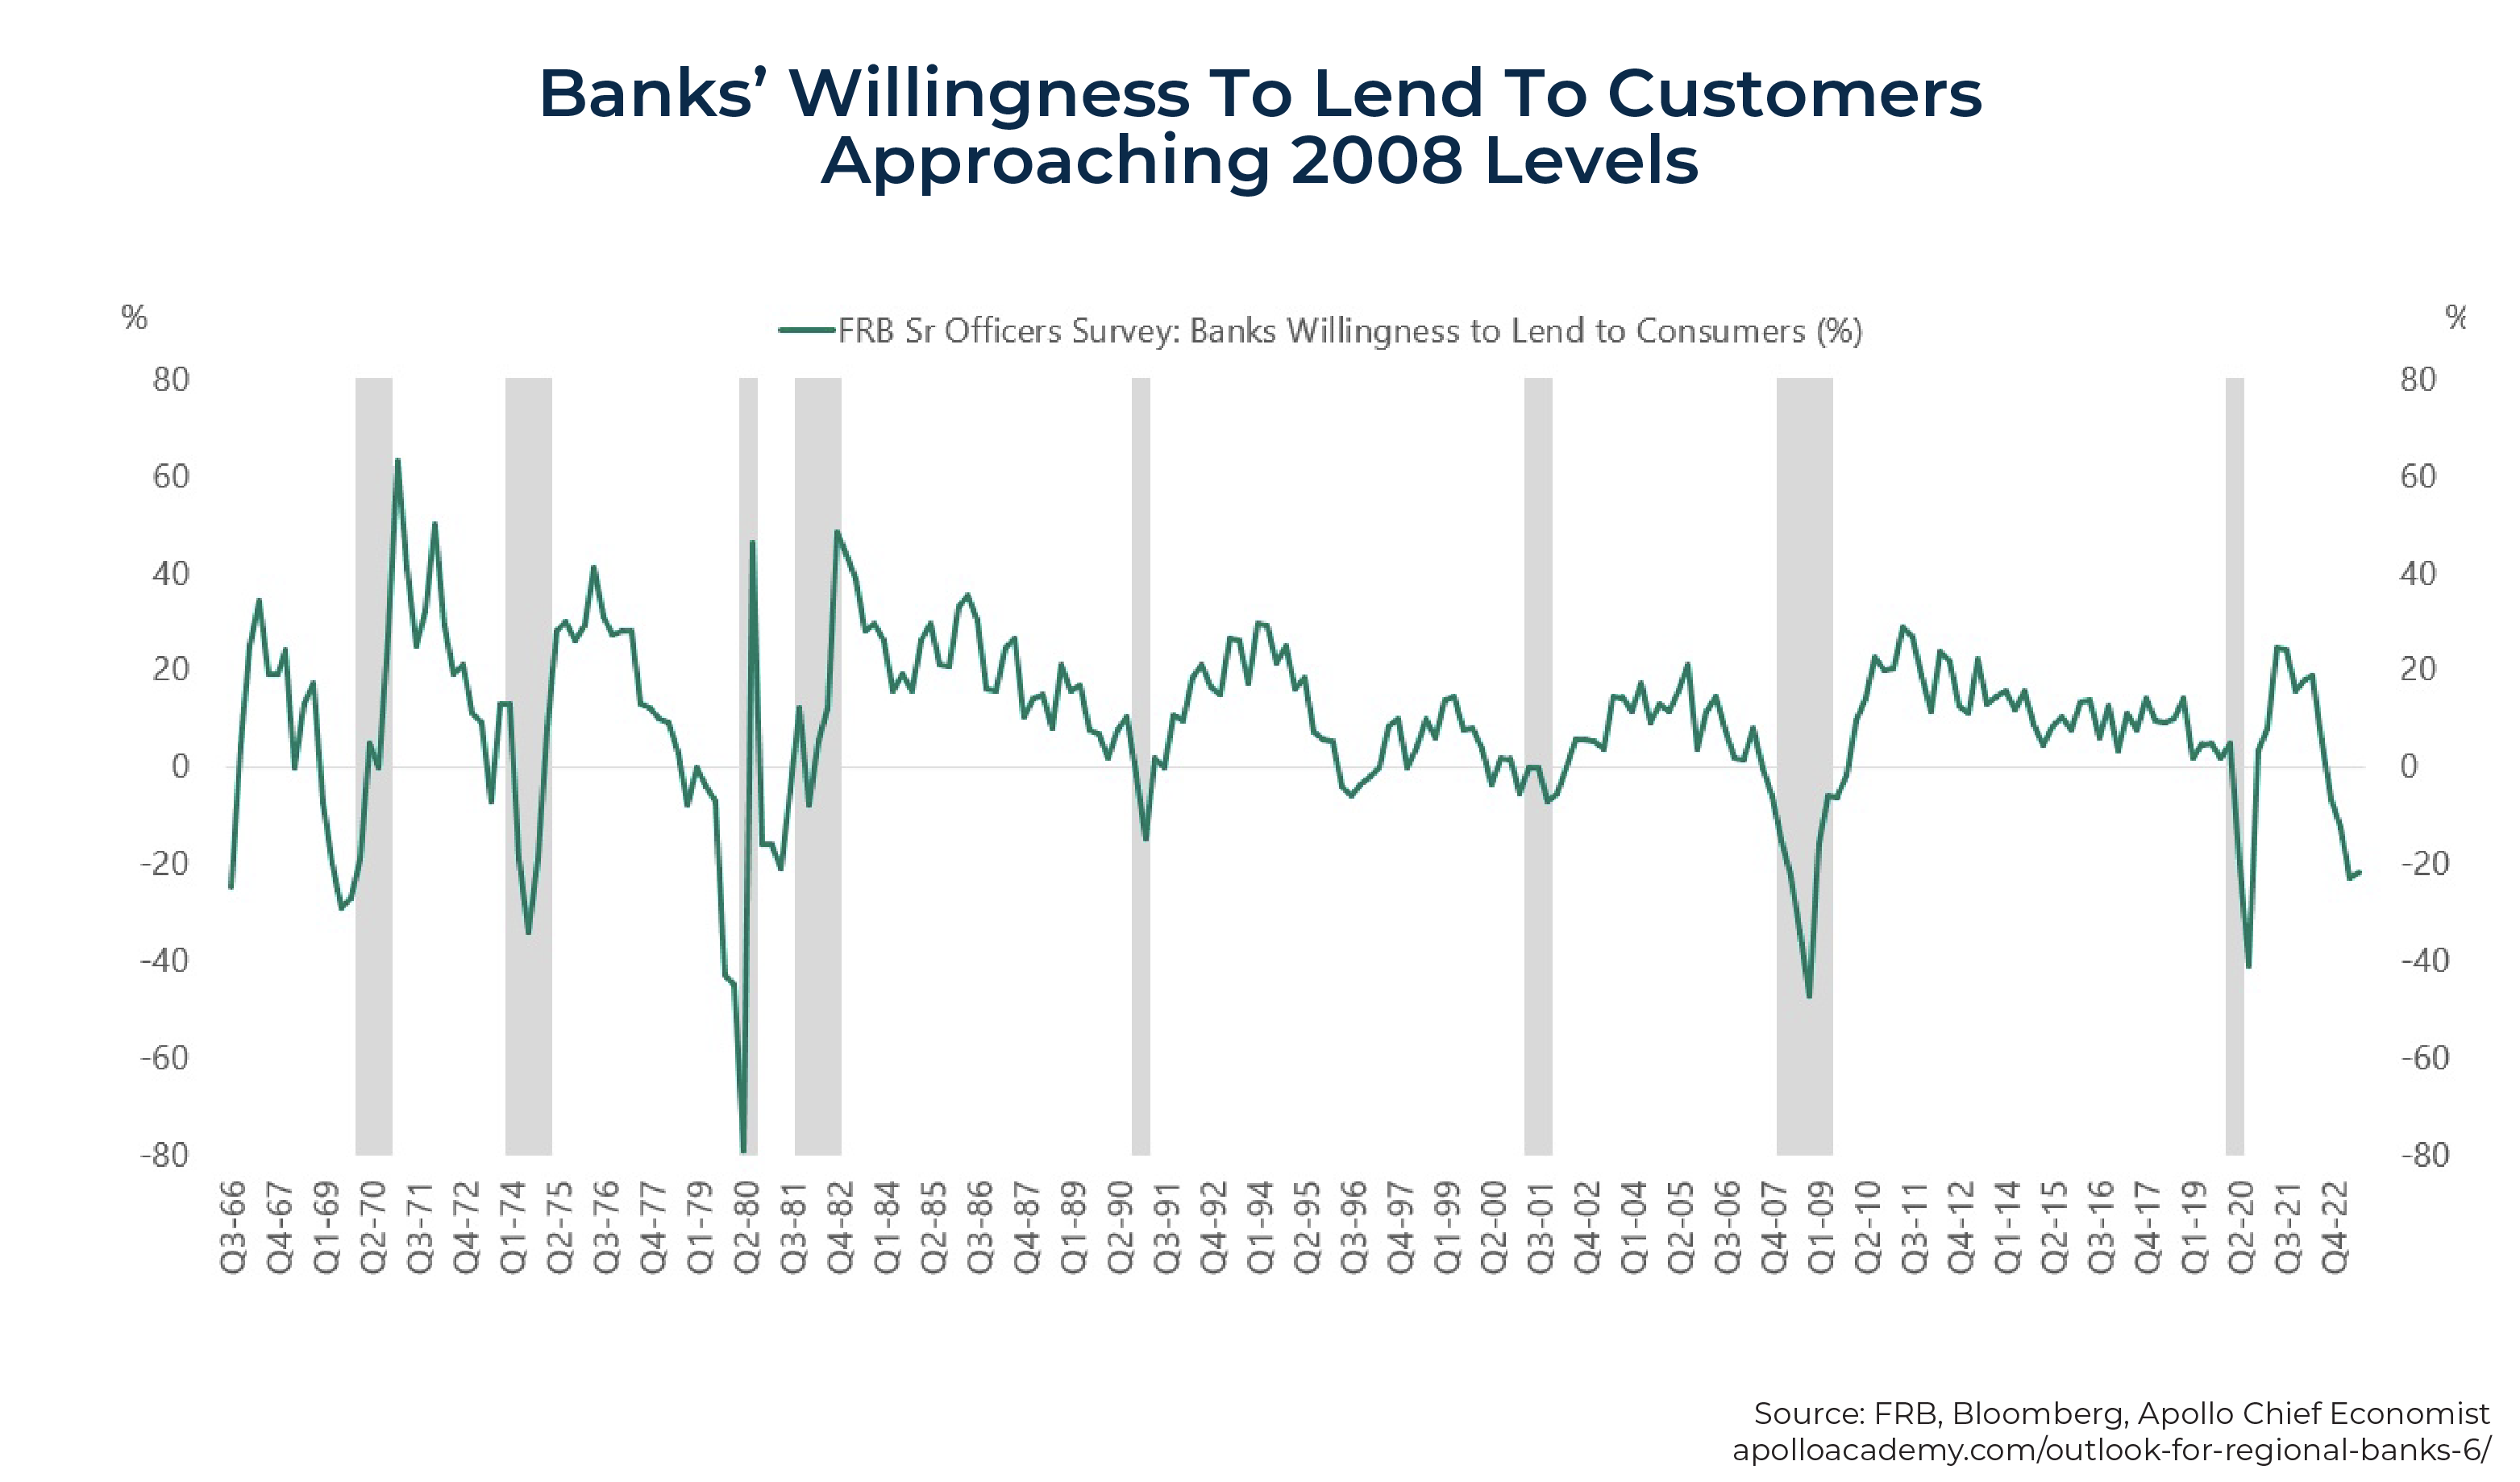 Banks Willingness To Lend To Customers Approach Levels